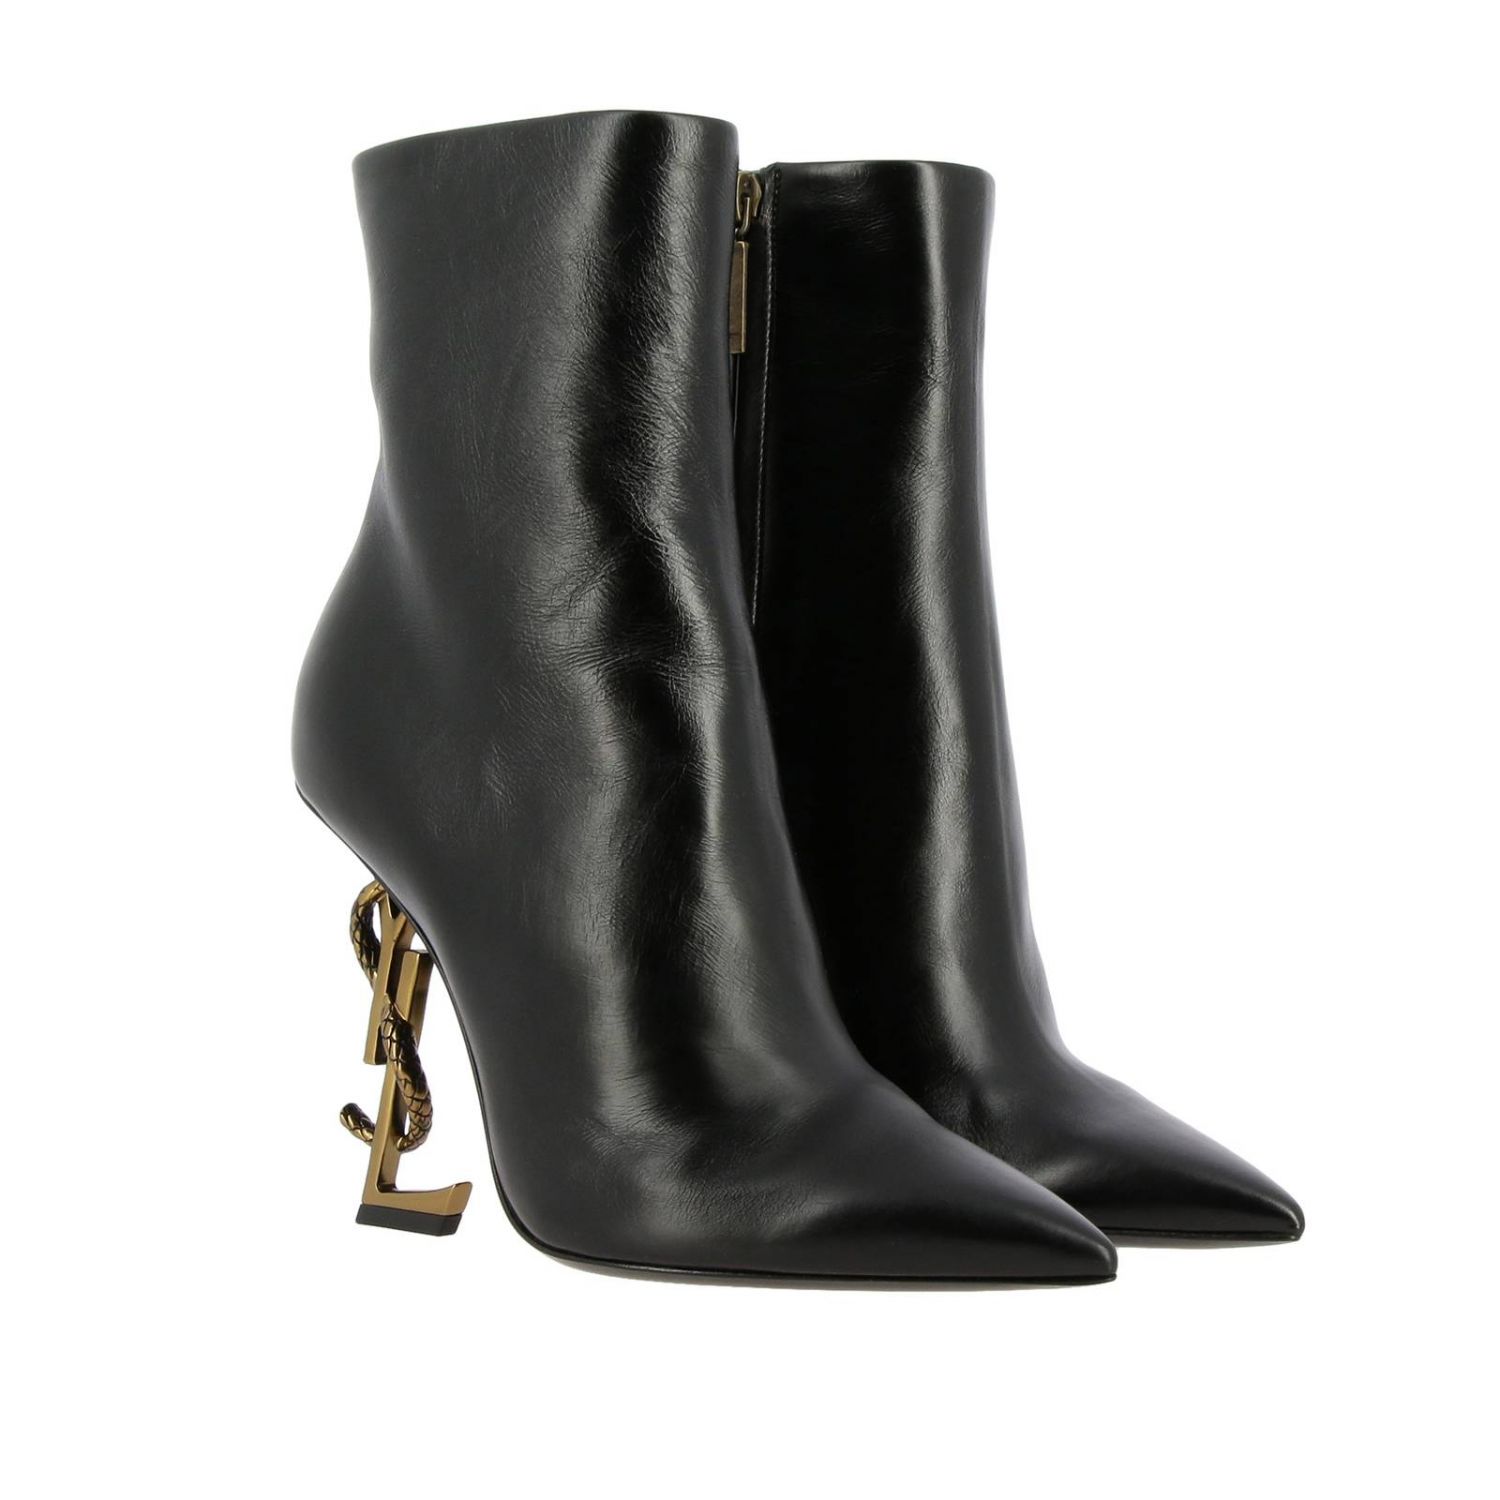 SAINT LAURENT: Opyum ankle boots in leather with 